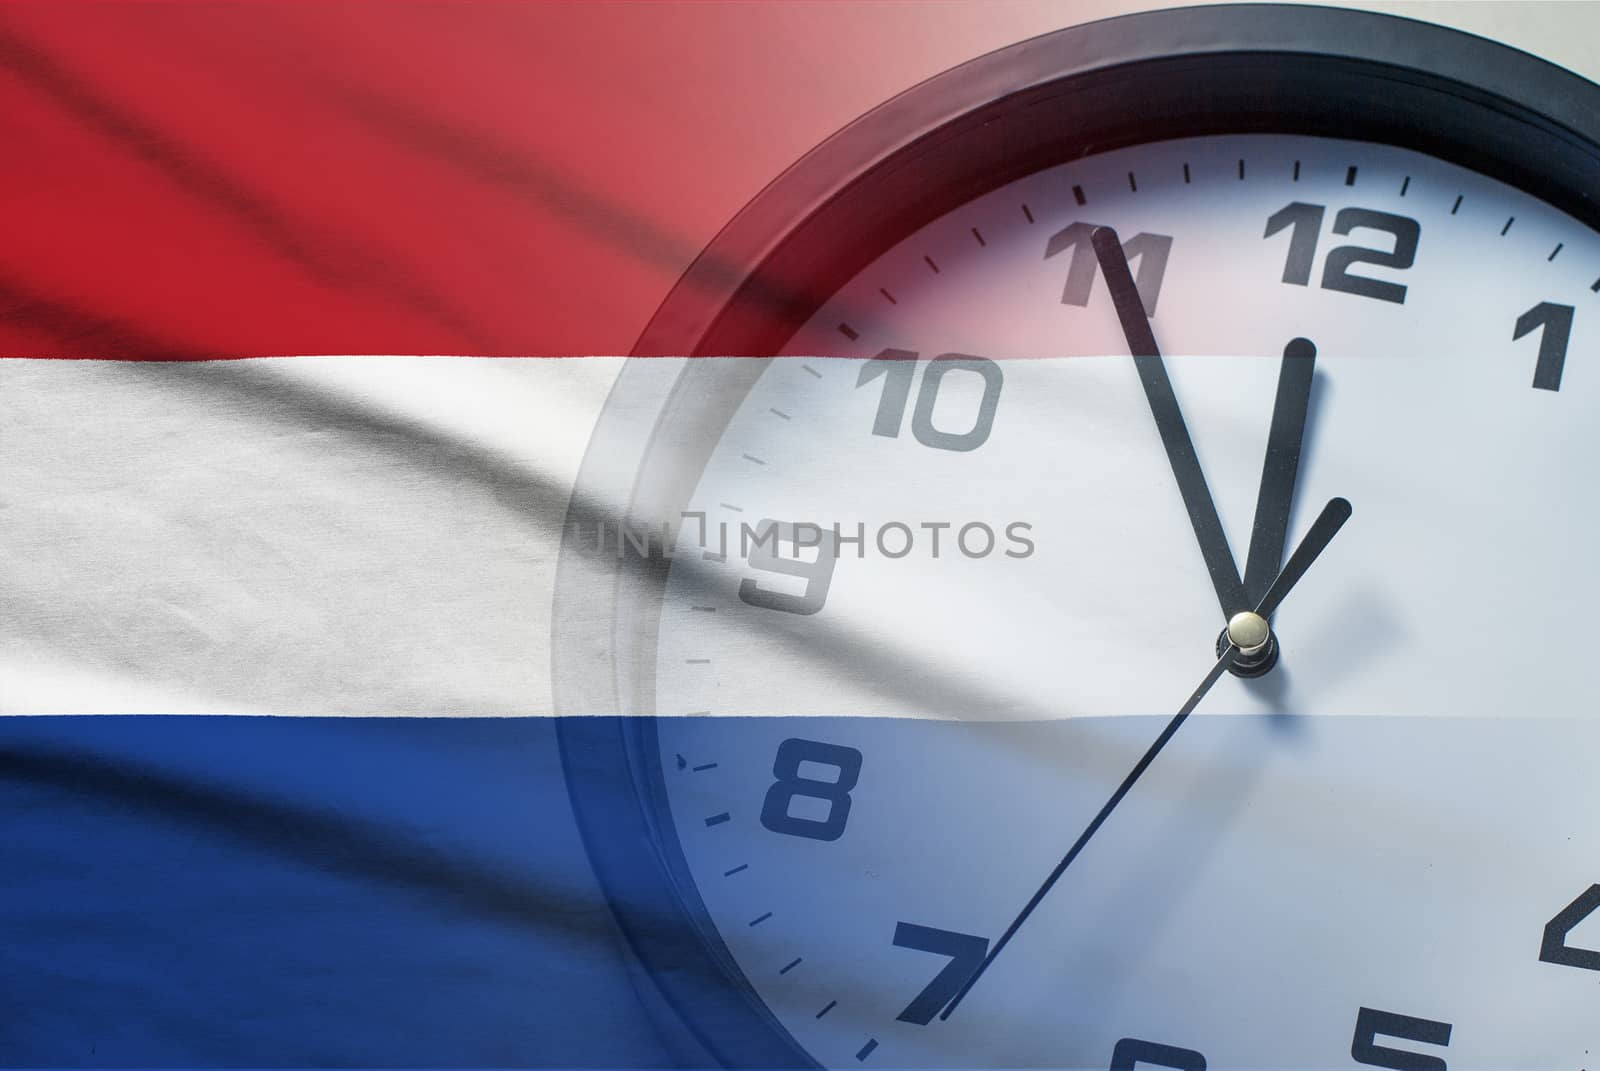 Composite of the Netherlands flag and a clock face counting down to twelve midnight or noon in a conceptual image